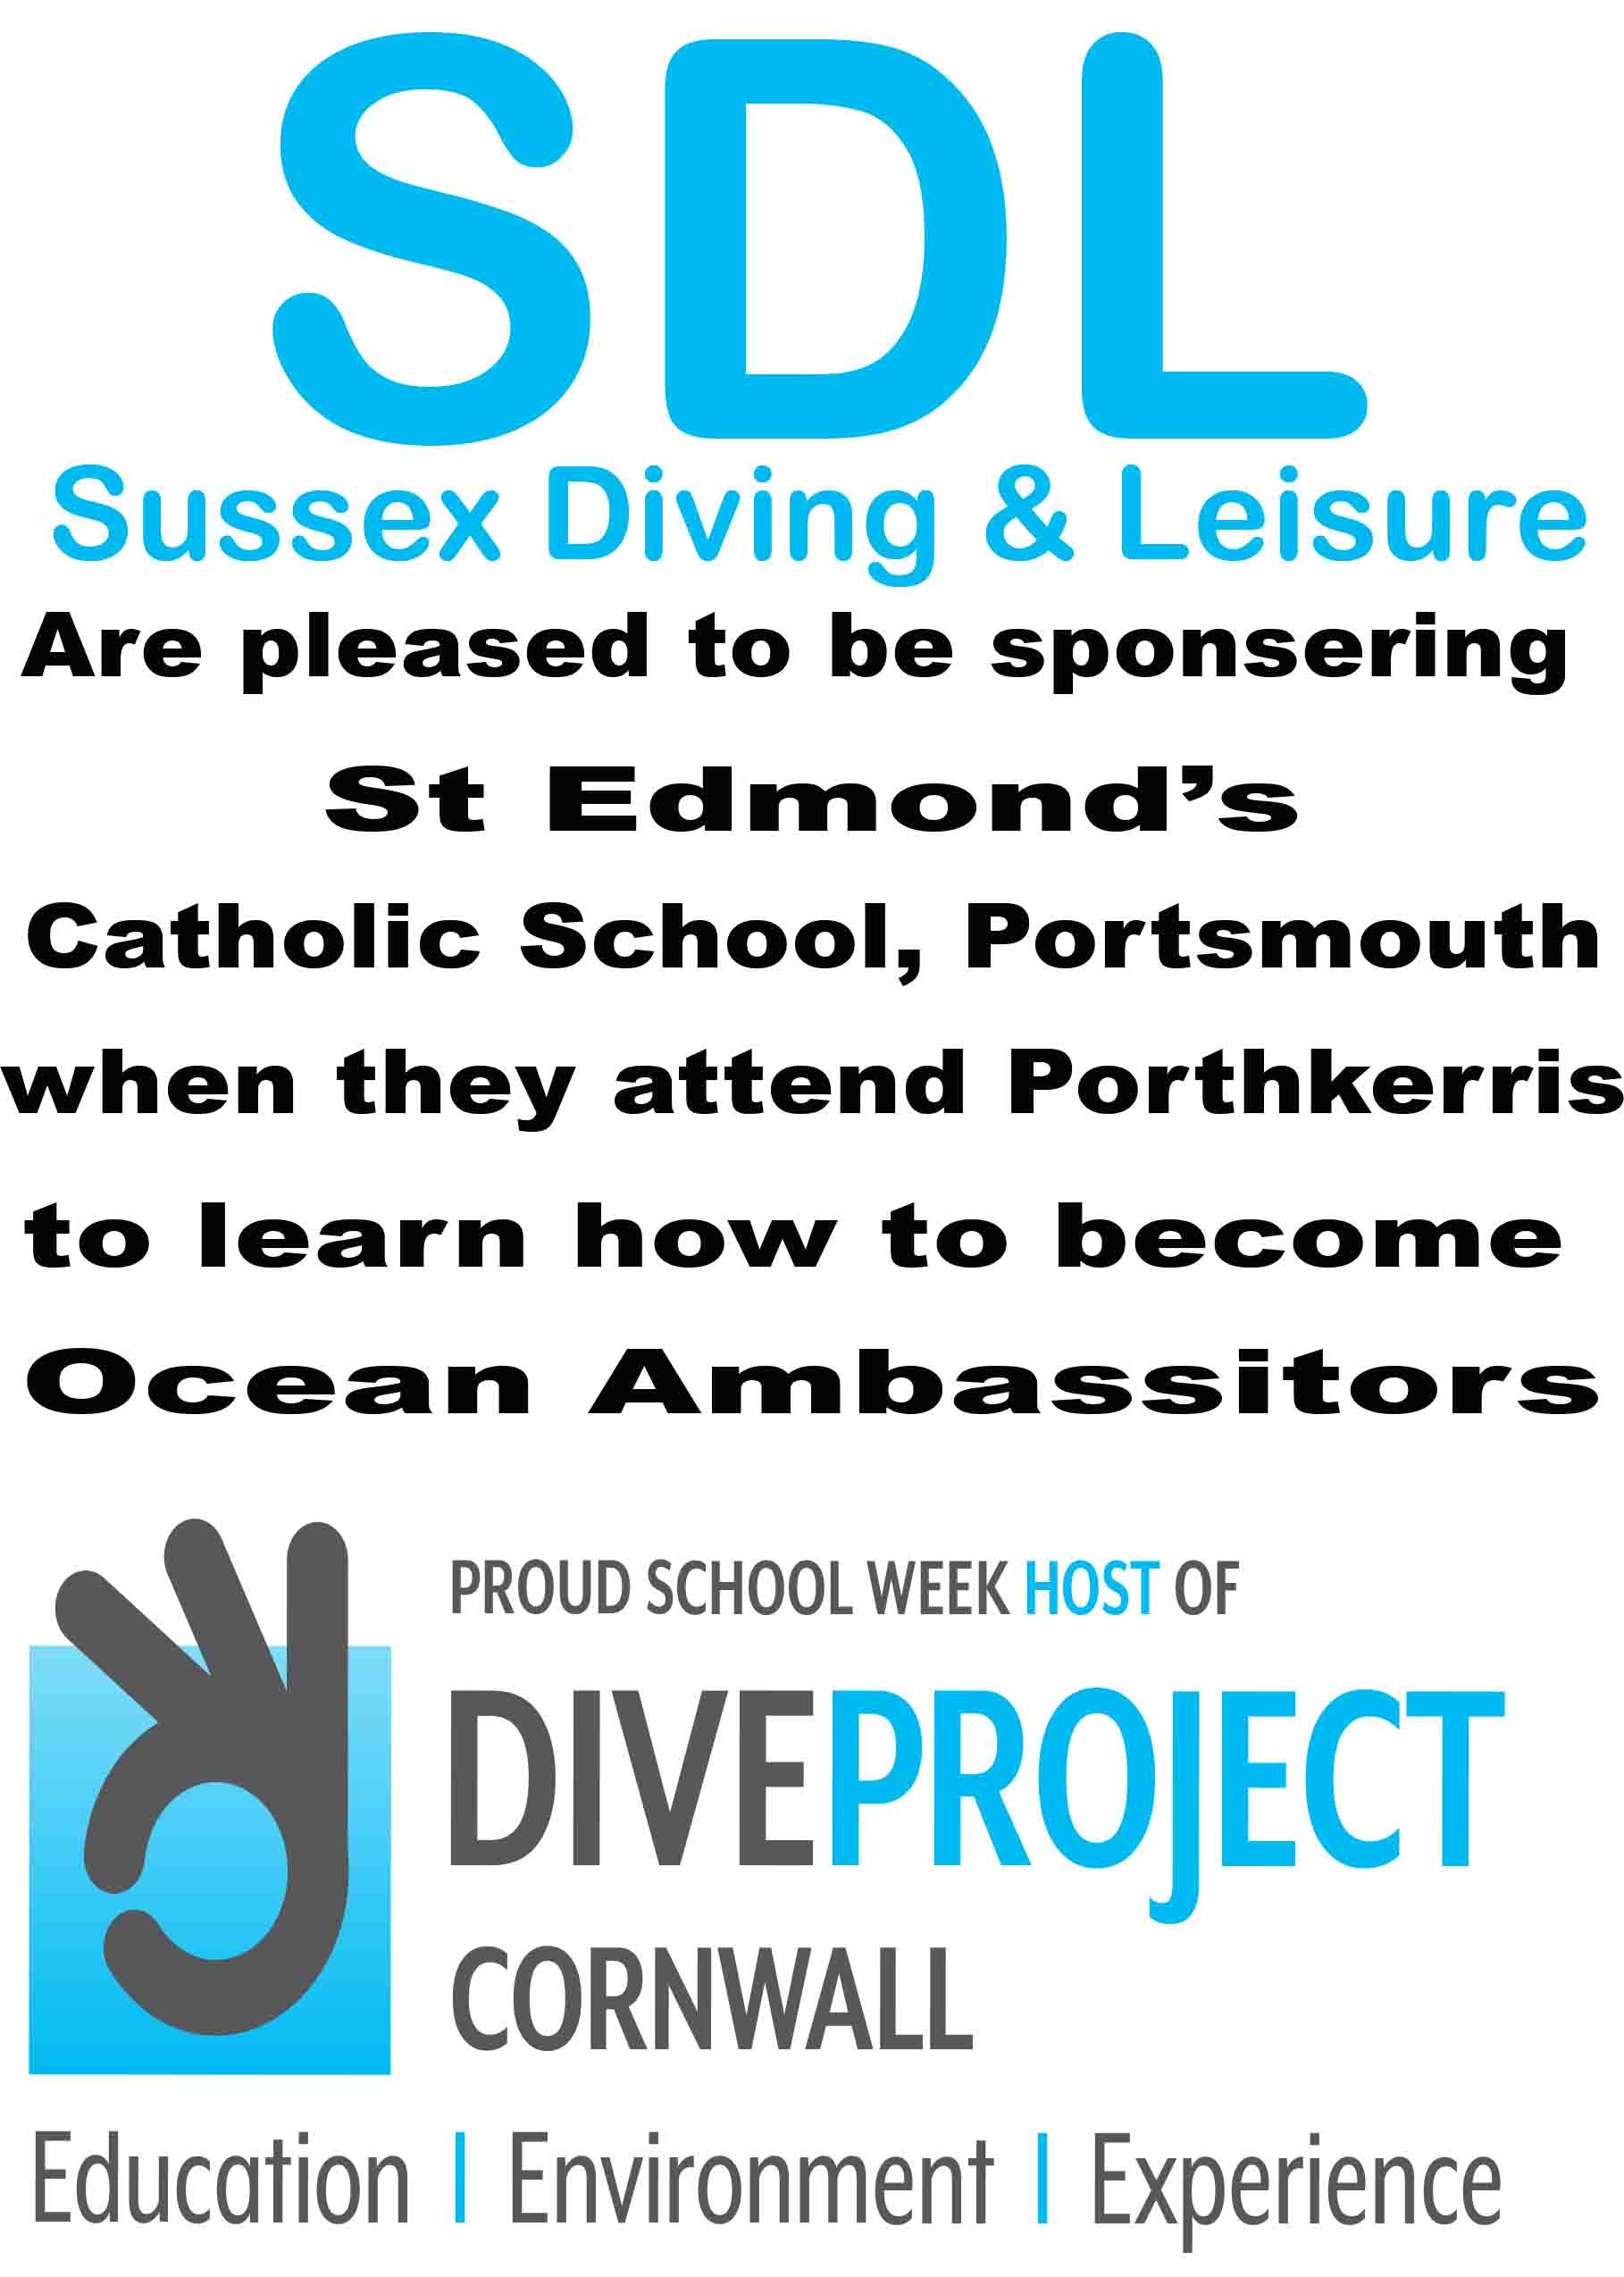 Dive Project Cornwall